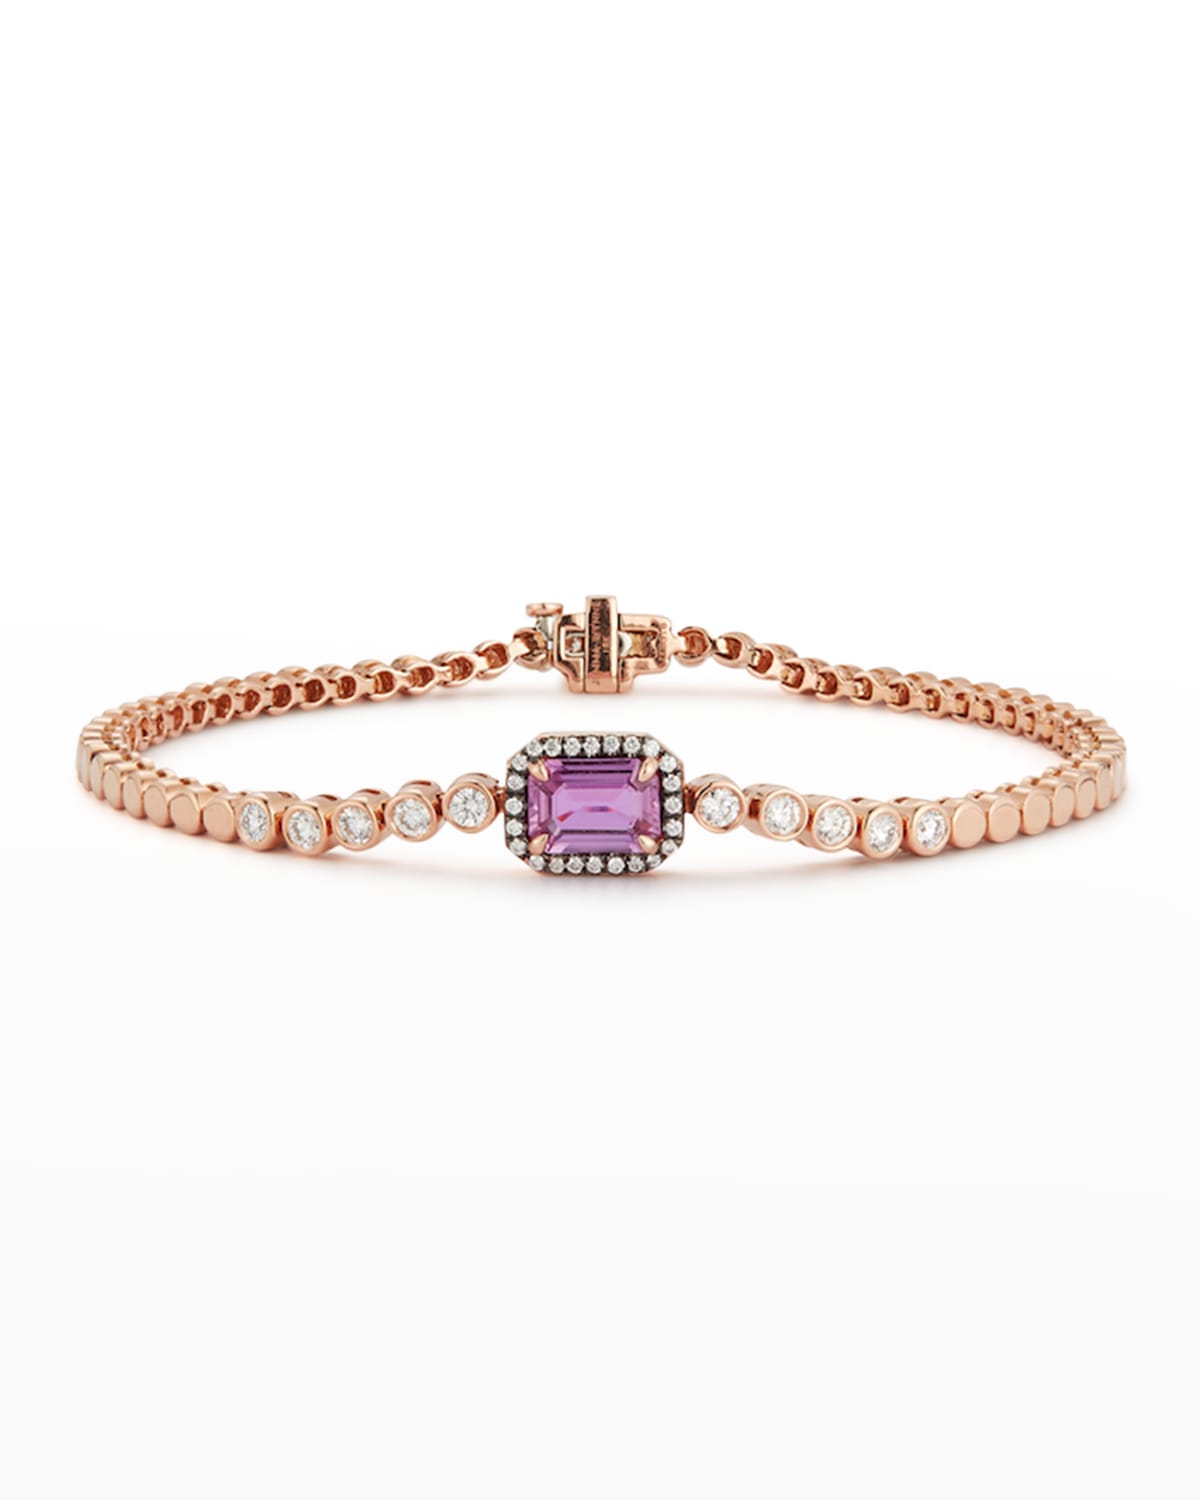 Jemma Wynne Rose Gold One-of-a-kind Prive Luxe Diamond Tennis Bracelet With Pink Sapphire And Diamonds